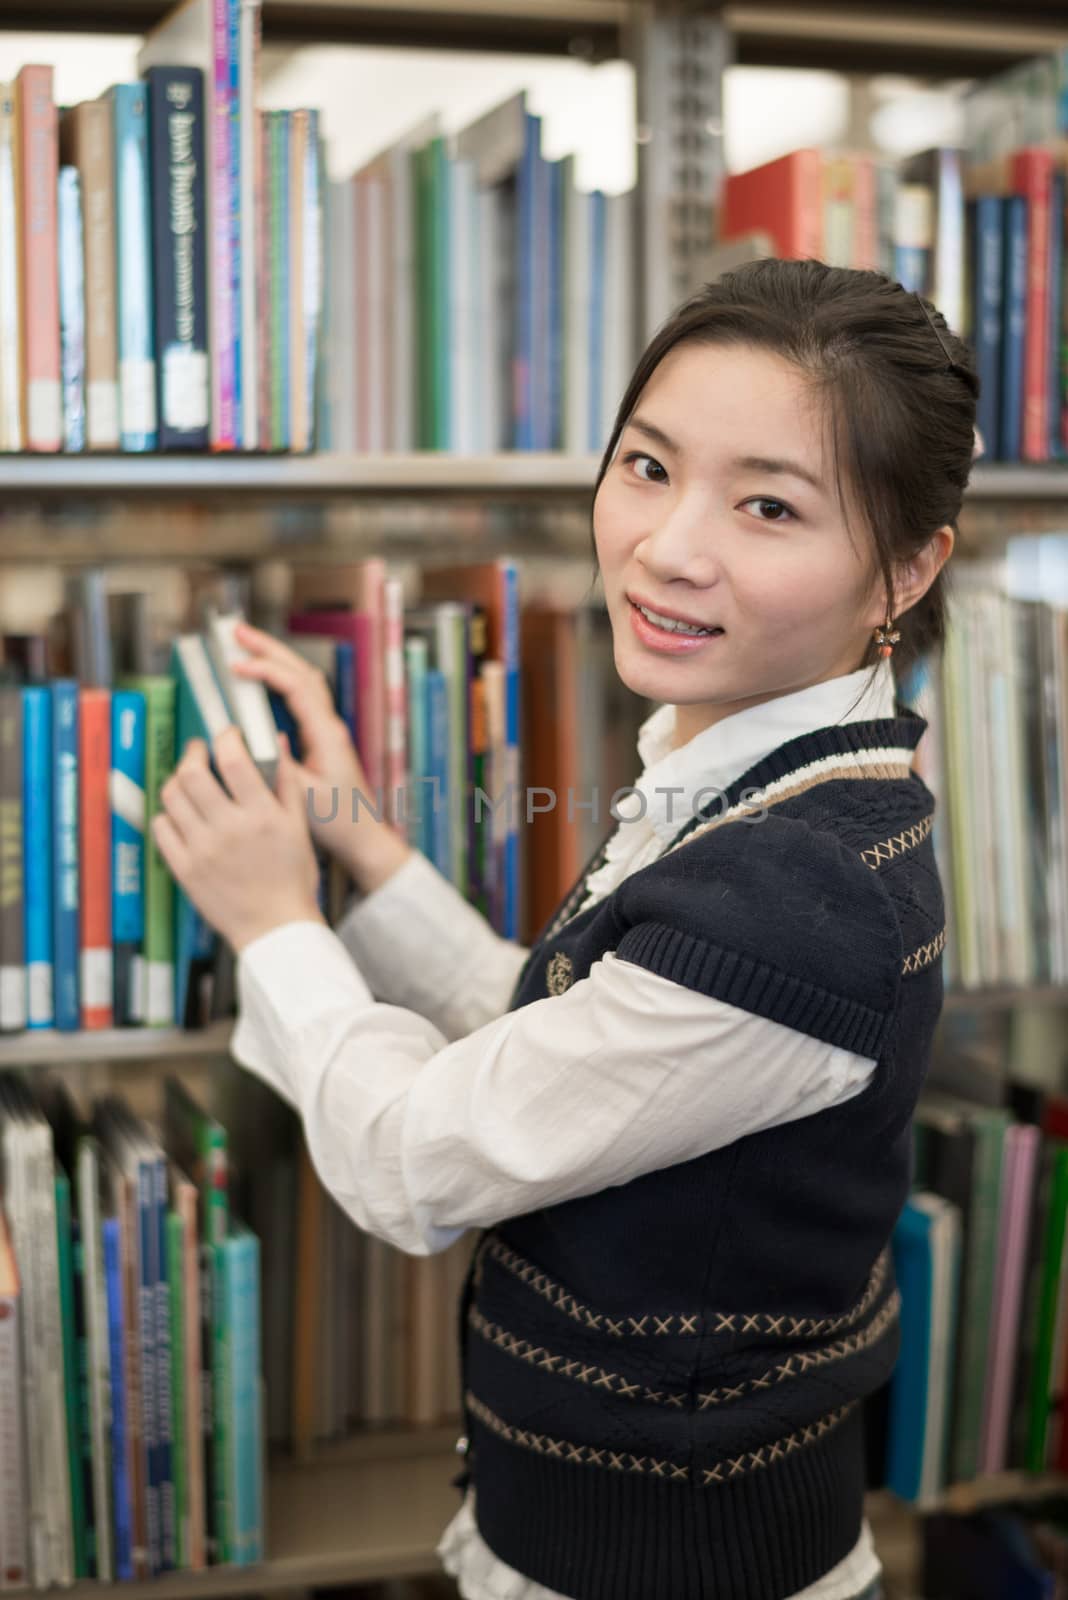 Portrati of student in front of bookshelf by IVYPHOTOS